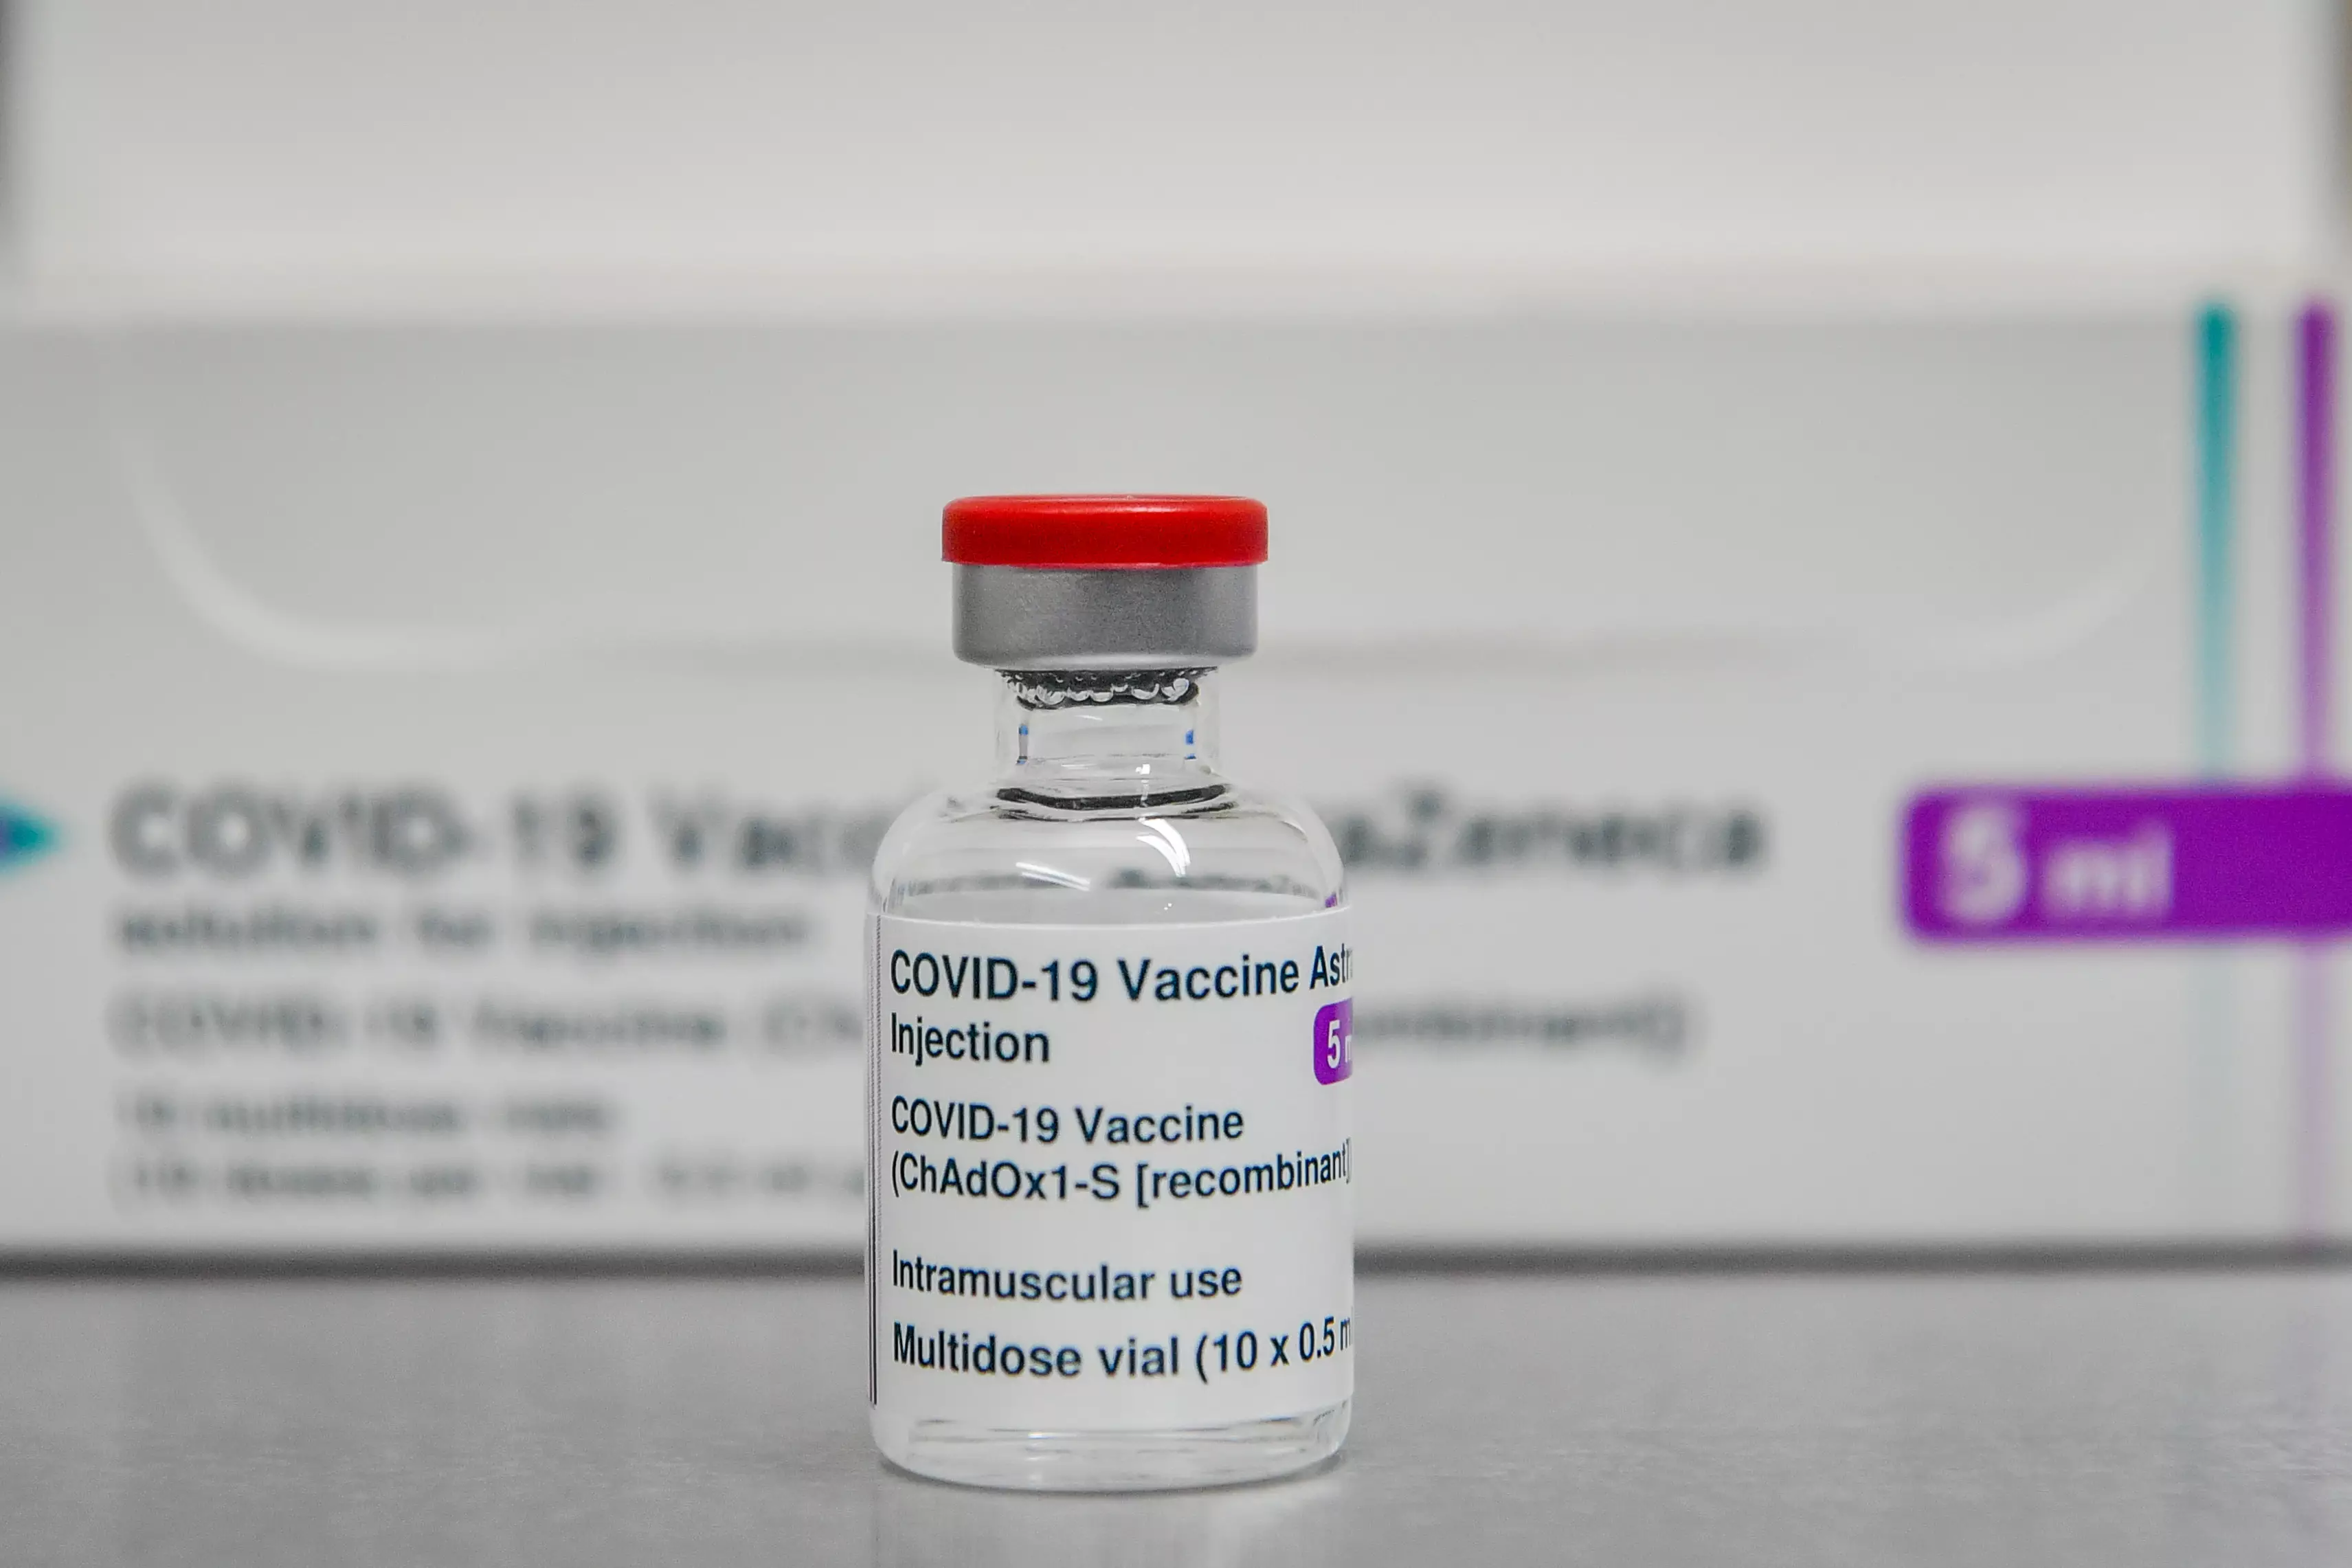 The Oxford vaccine was approved last week.